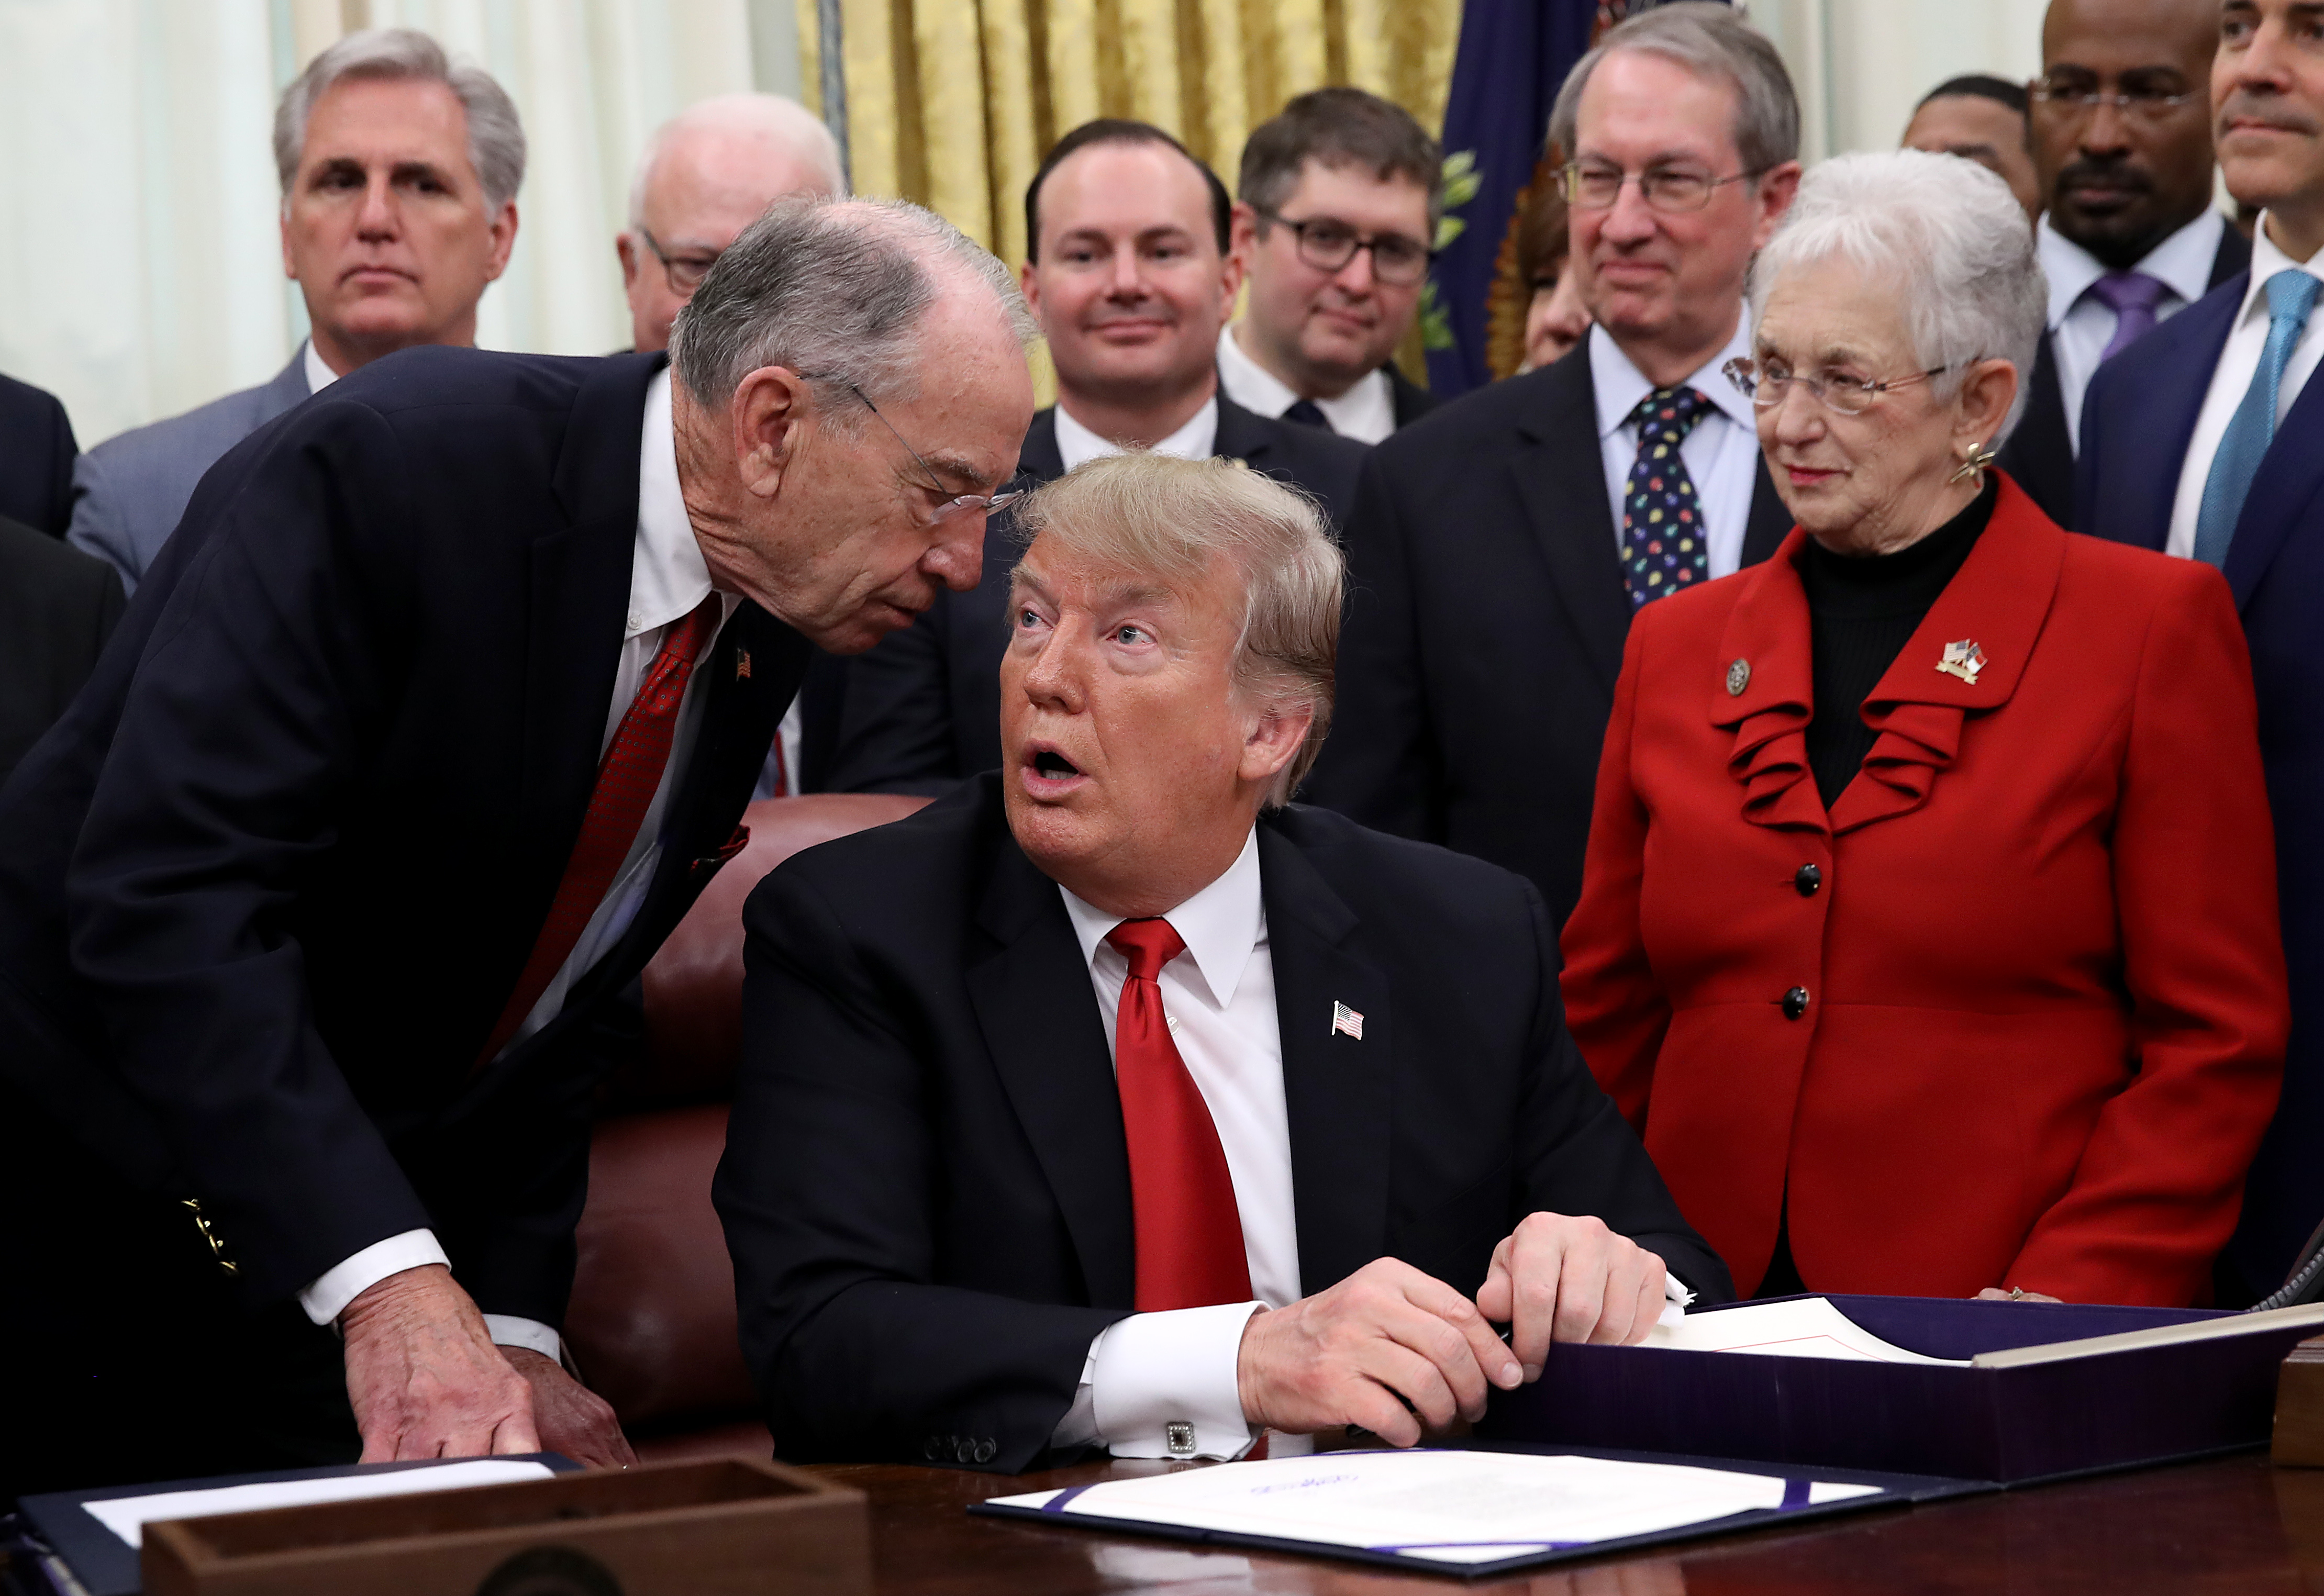 Senate Judiciary Committee Chairman Chuck Grassley (L) (R-IA) tells U.S. President Donald Trump that he needs to leave to cast a vote in the U.S. Senate during the signing ceremony for the First Step Act and the Juvenile Justice Reform Act in the Oval Office of the White House December 21, 2018 in Washington, DC. (Photo by Win McNamee/Getty Images)